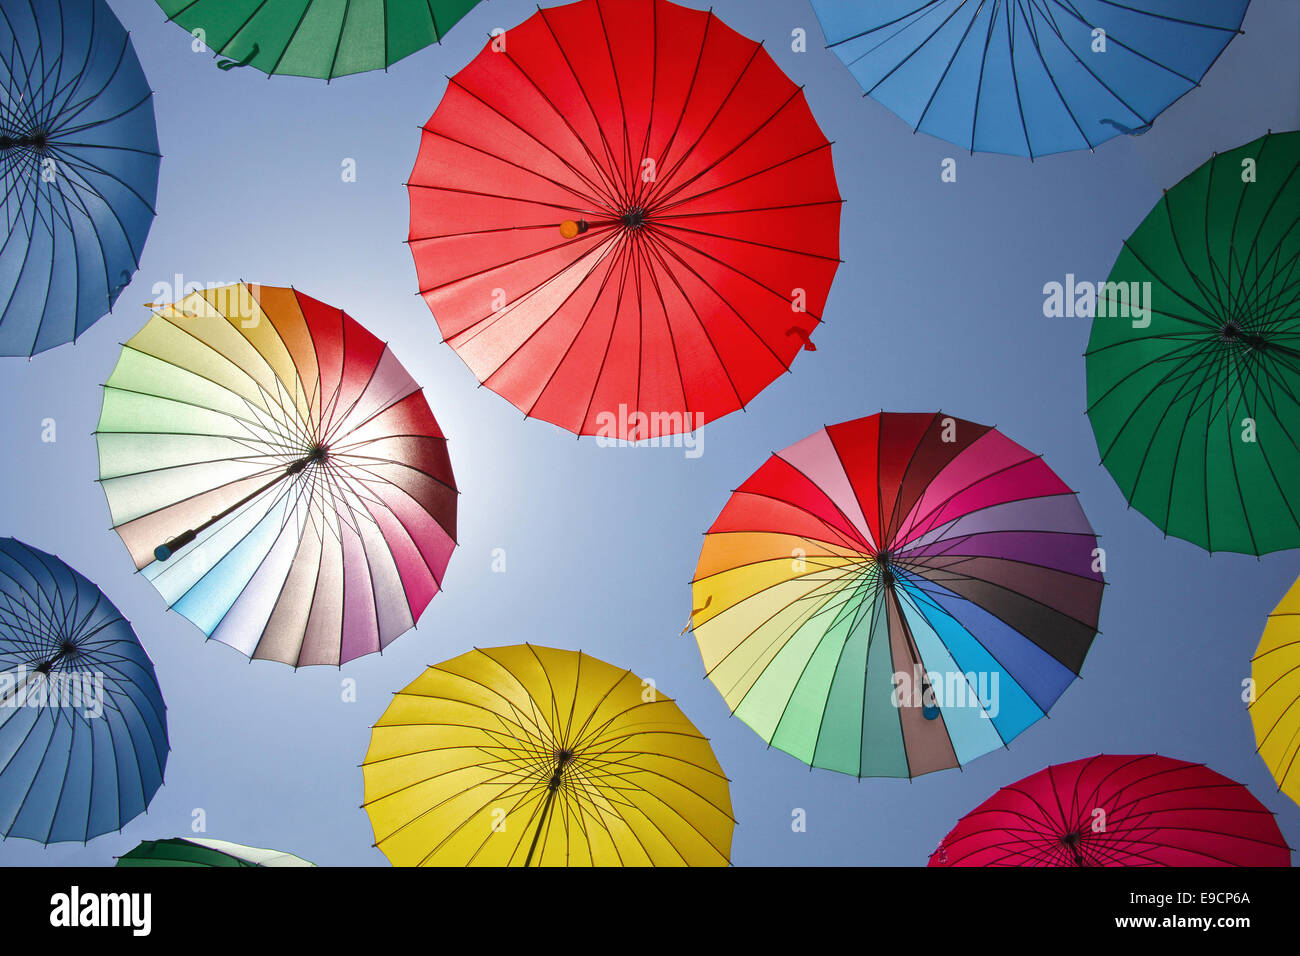 Collection of multi colored umbrellas hanging up in an open position over a street offering shade & protection from the elements Stock Photo